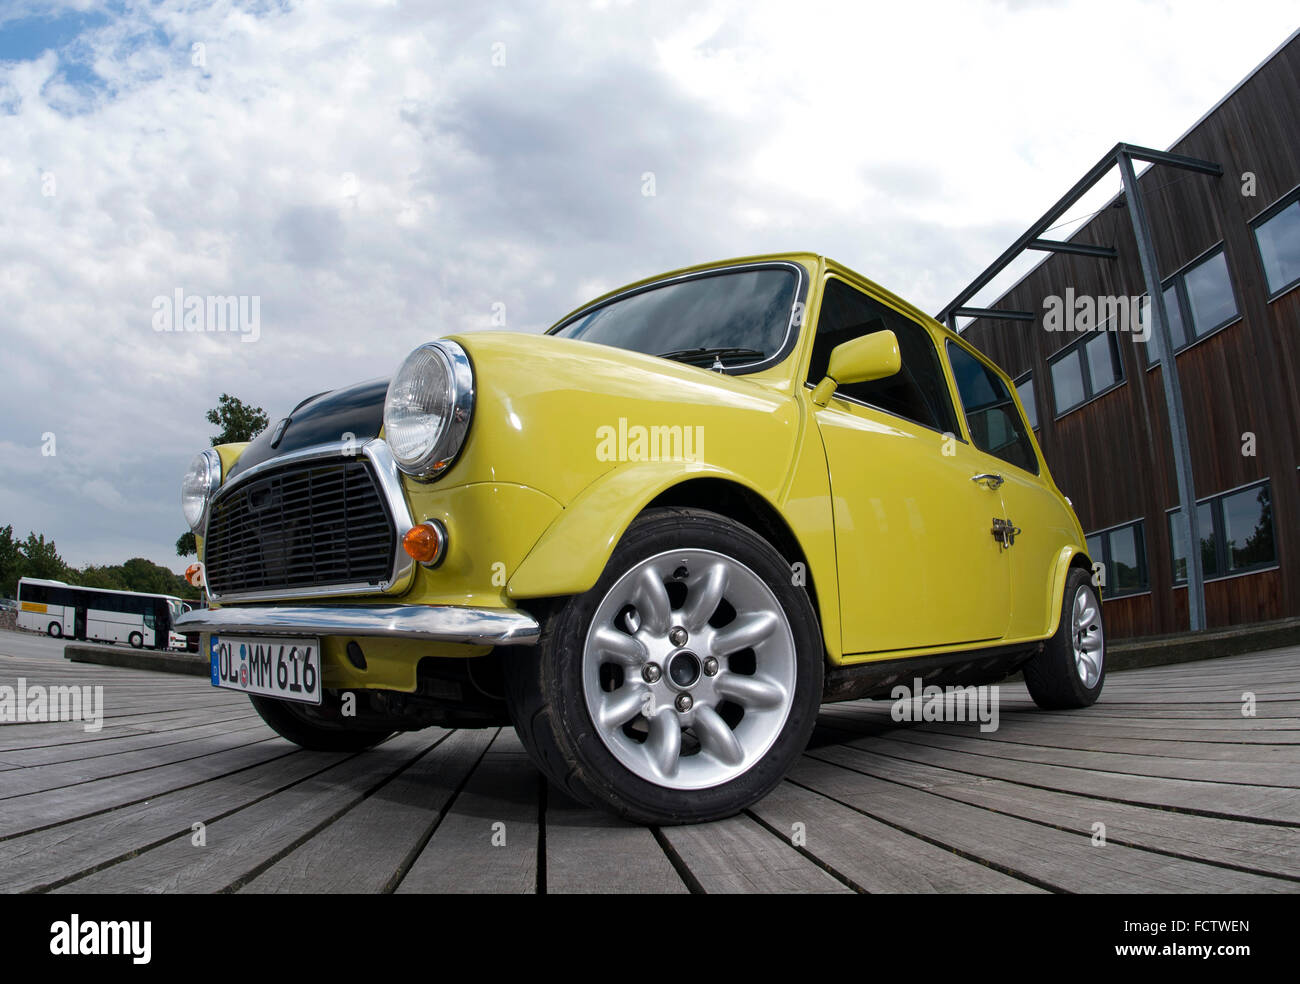 Mr Bean style Mini car complete with bolts on the doors Stock Photo